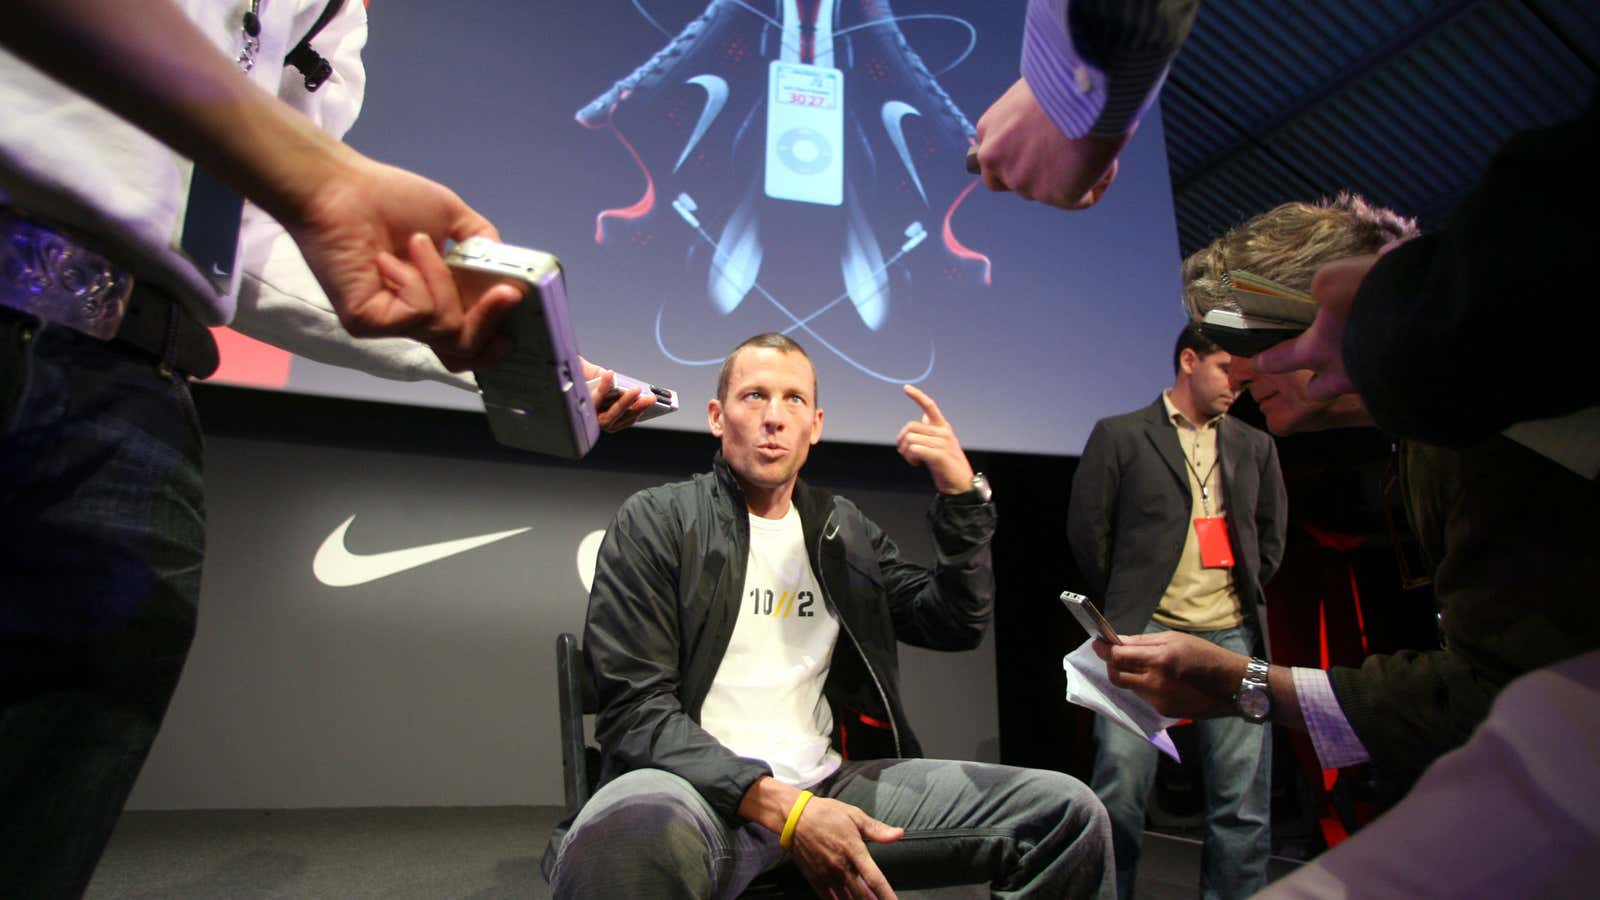 Nike dropped Lance Armstrong after doping charges surfaced. Now that he’s admitted to it, the company wants him back?